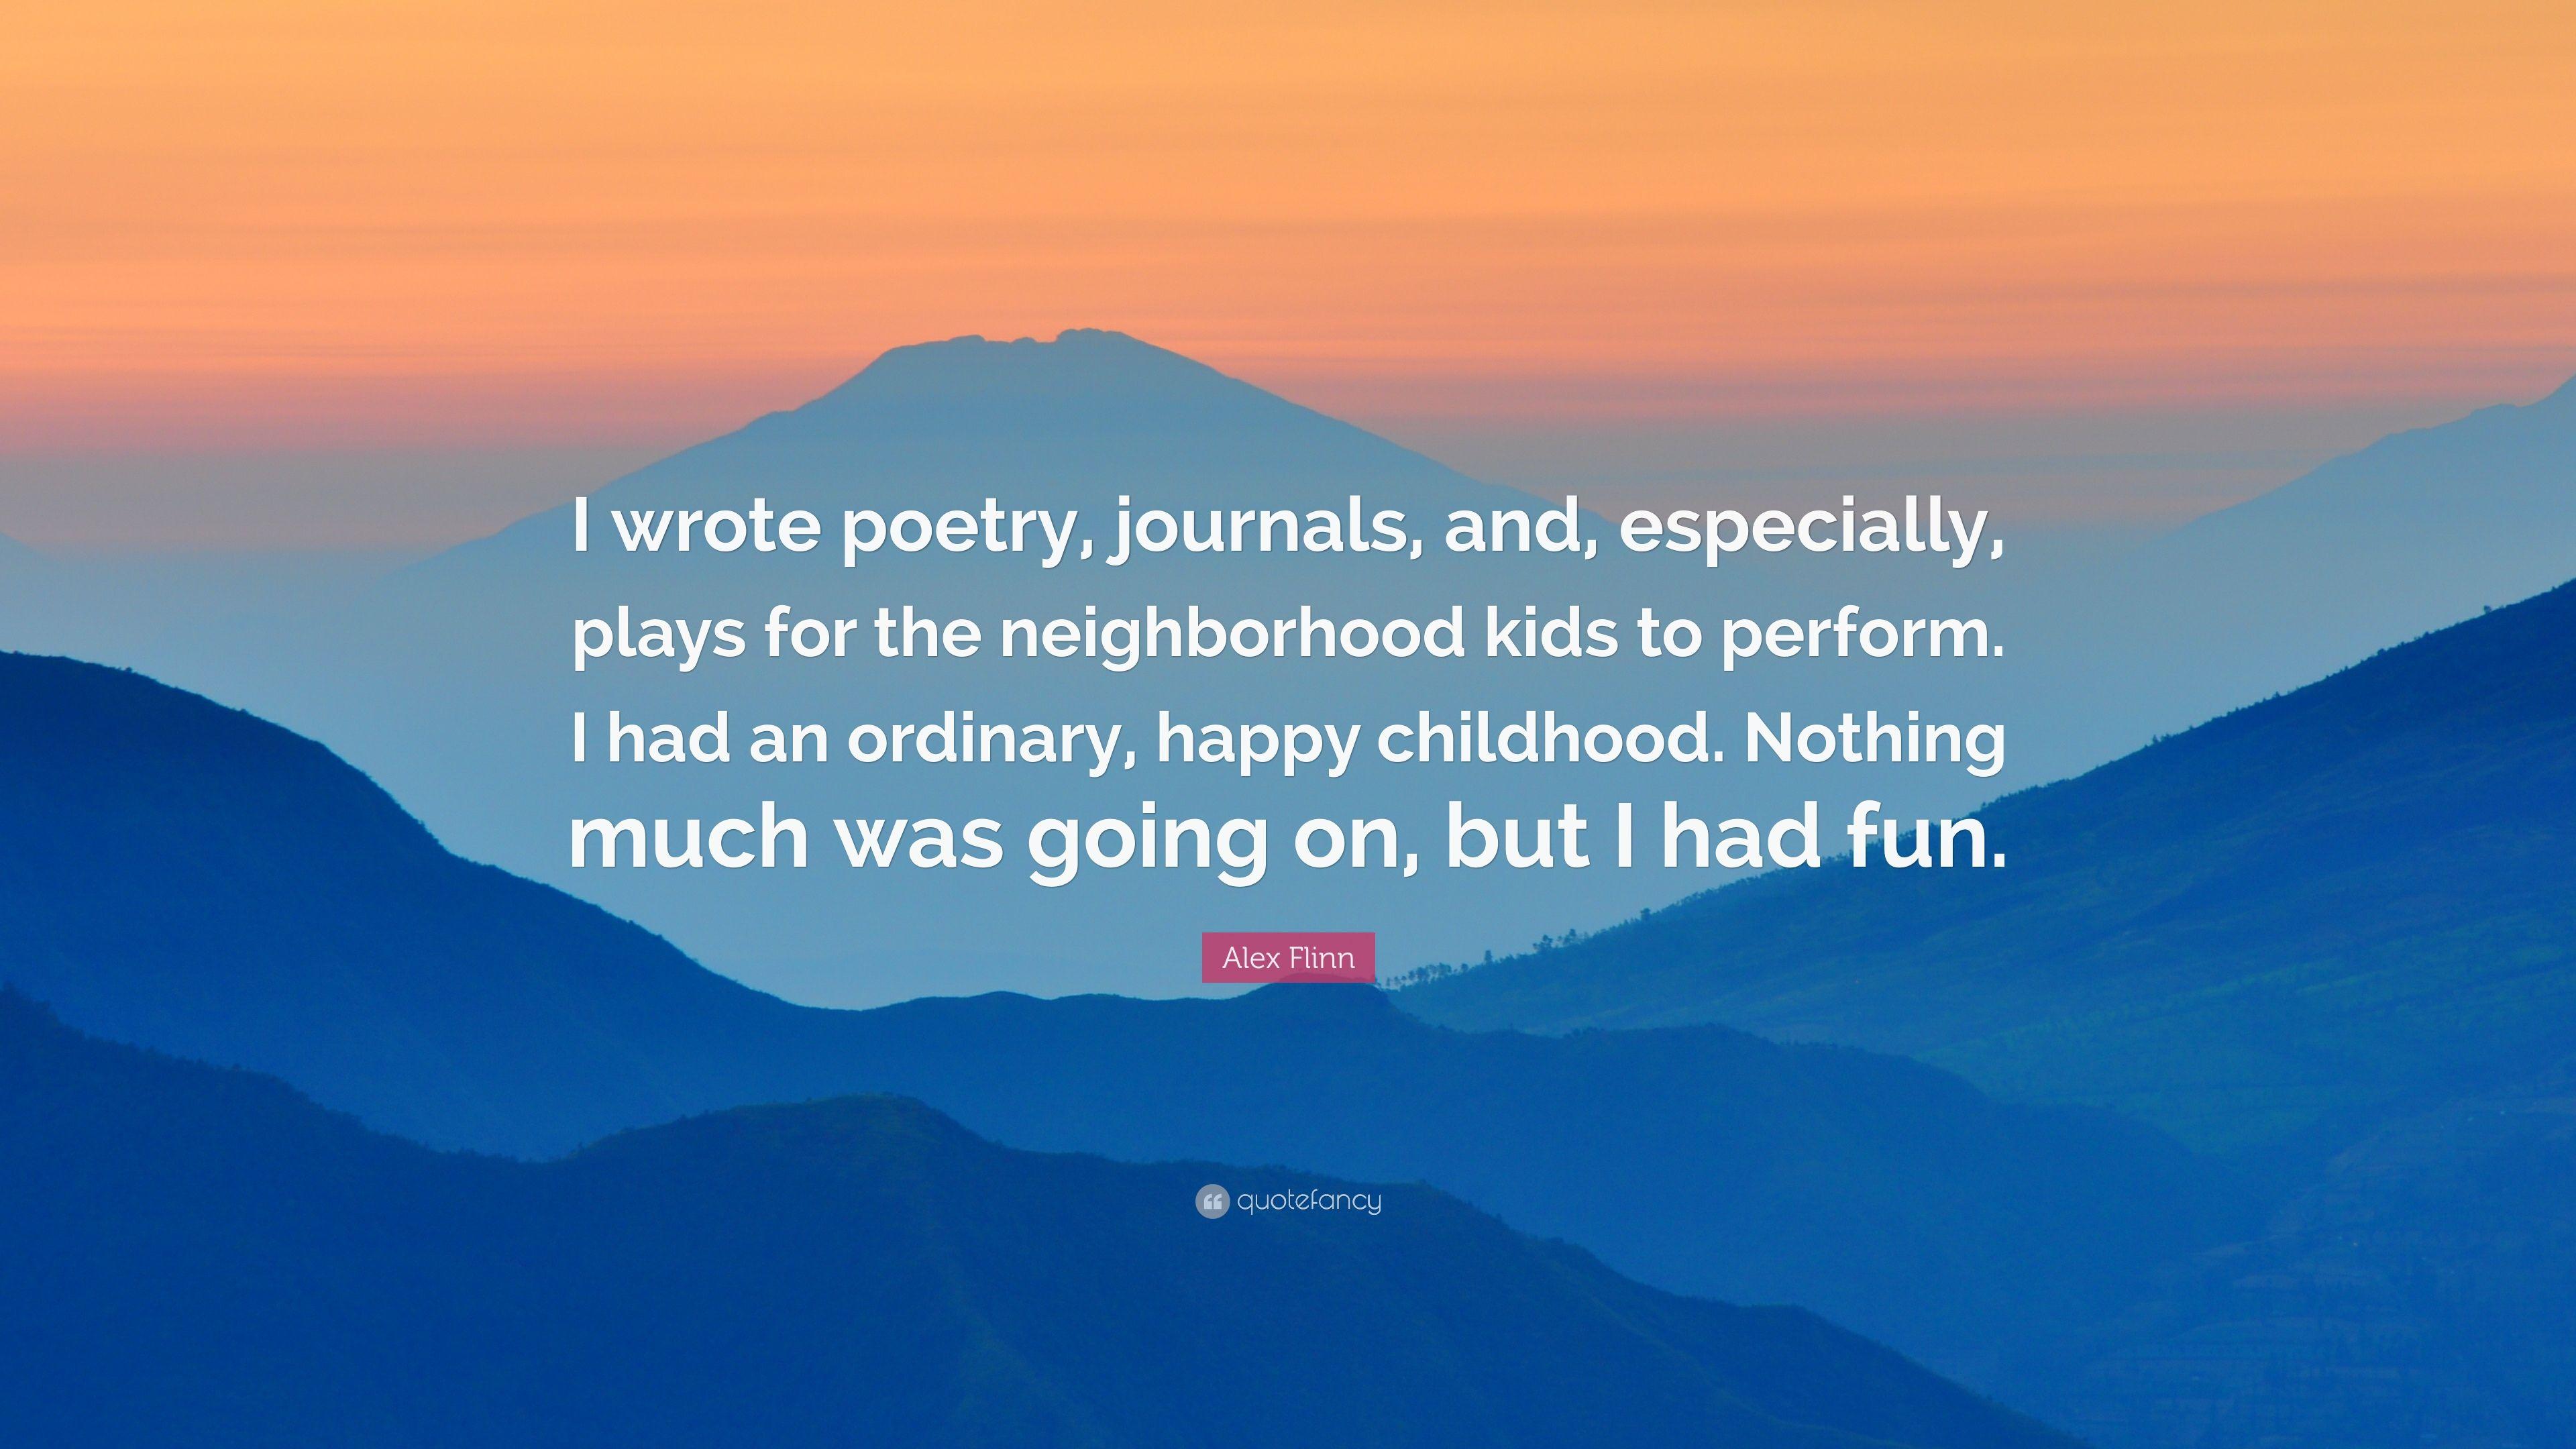 Alex Flinn Quote: “I wrote poetry, journals, and, especially